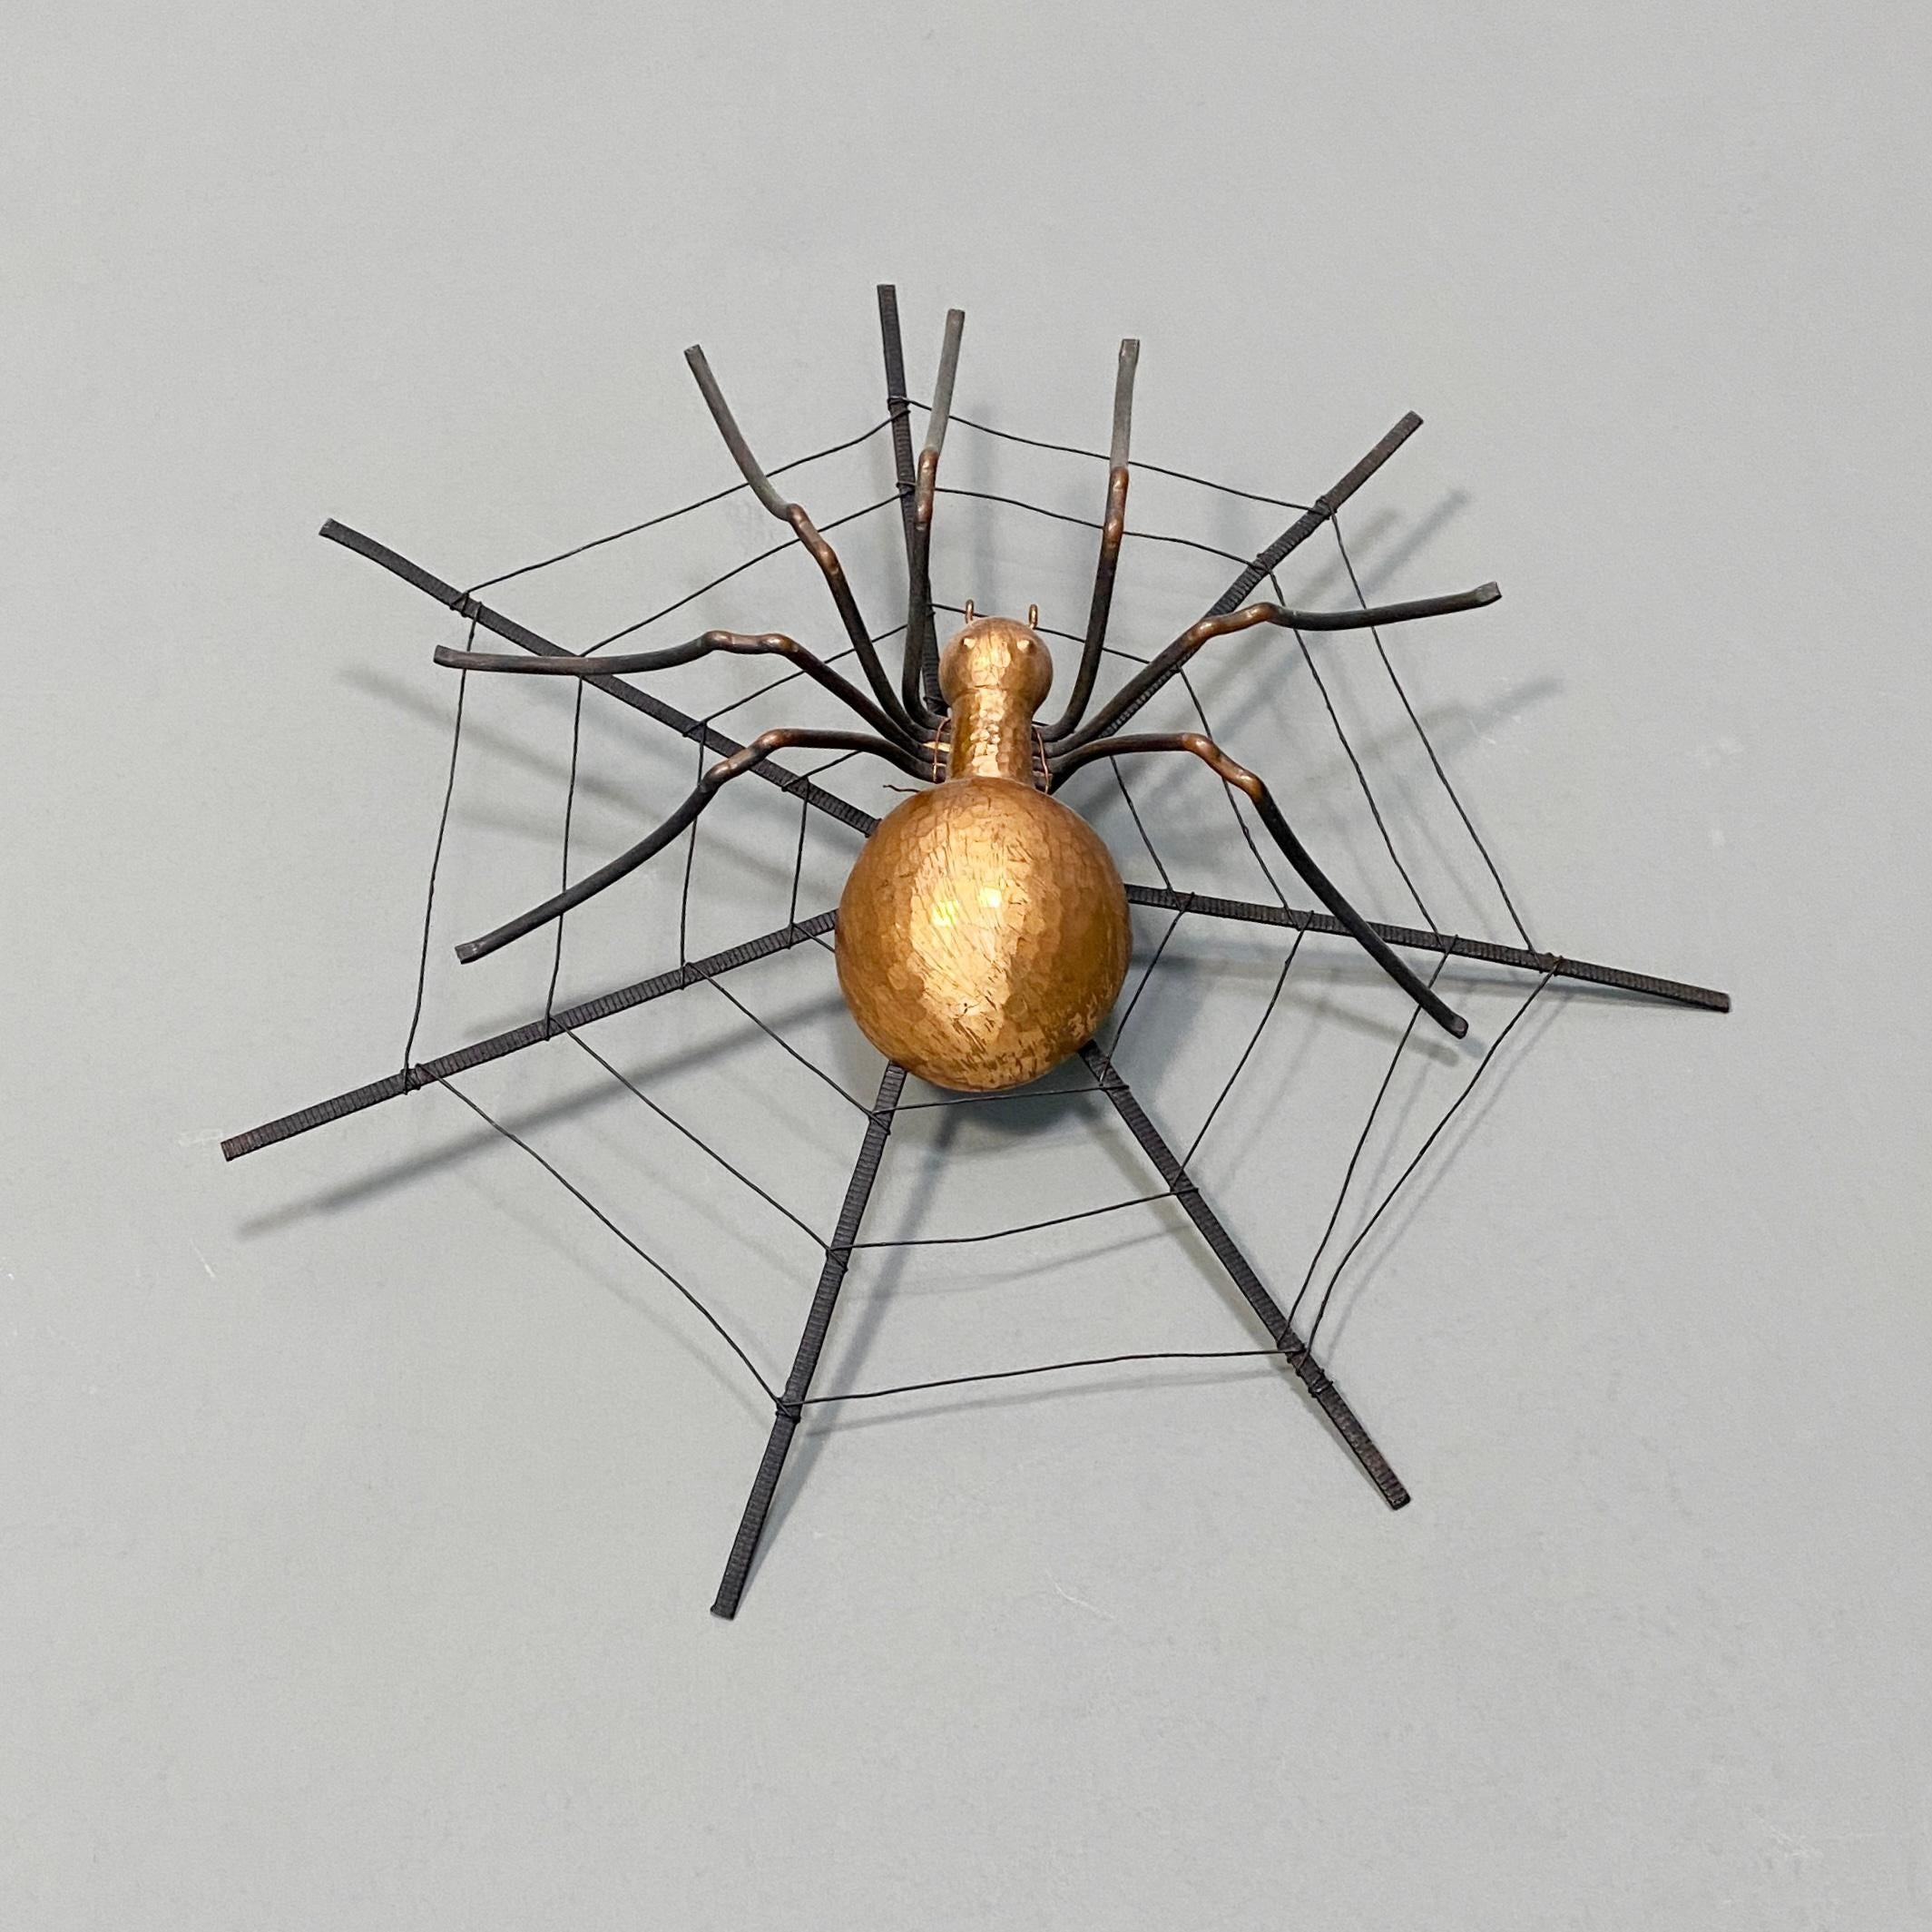 Metal Italian Mid-Century Modern Spider-Shaped Wall Decoration, 1960s For Sale